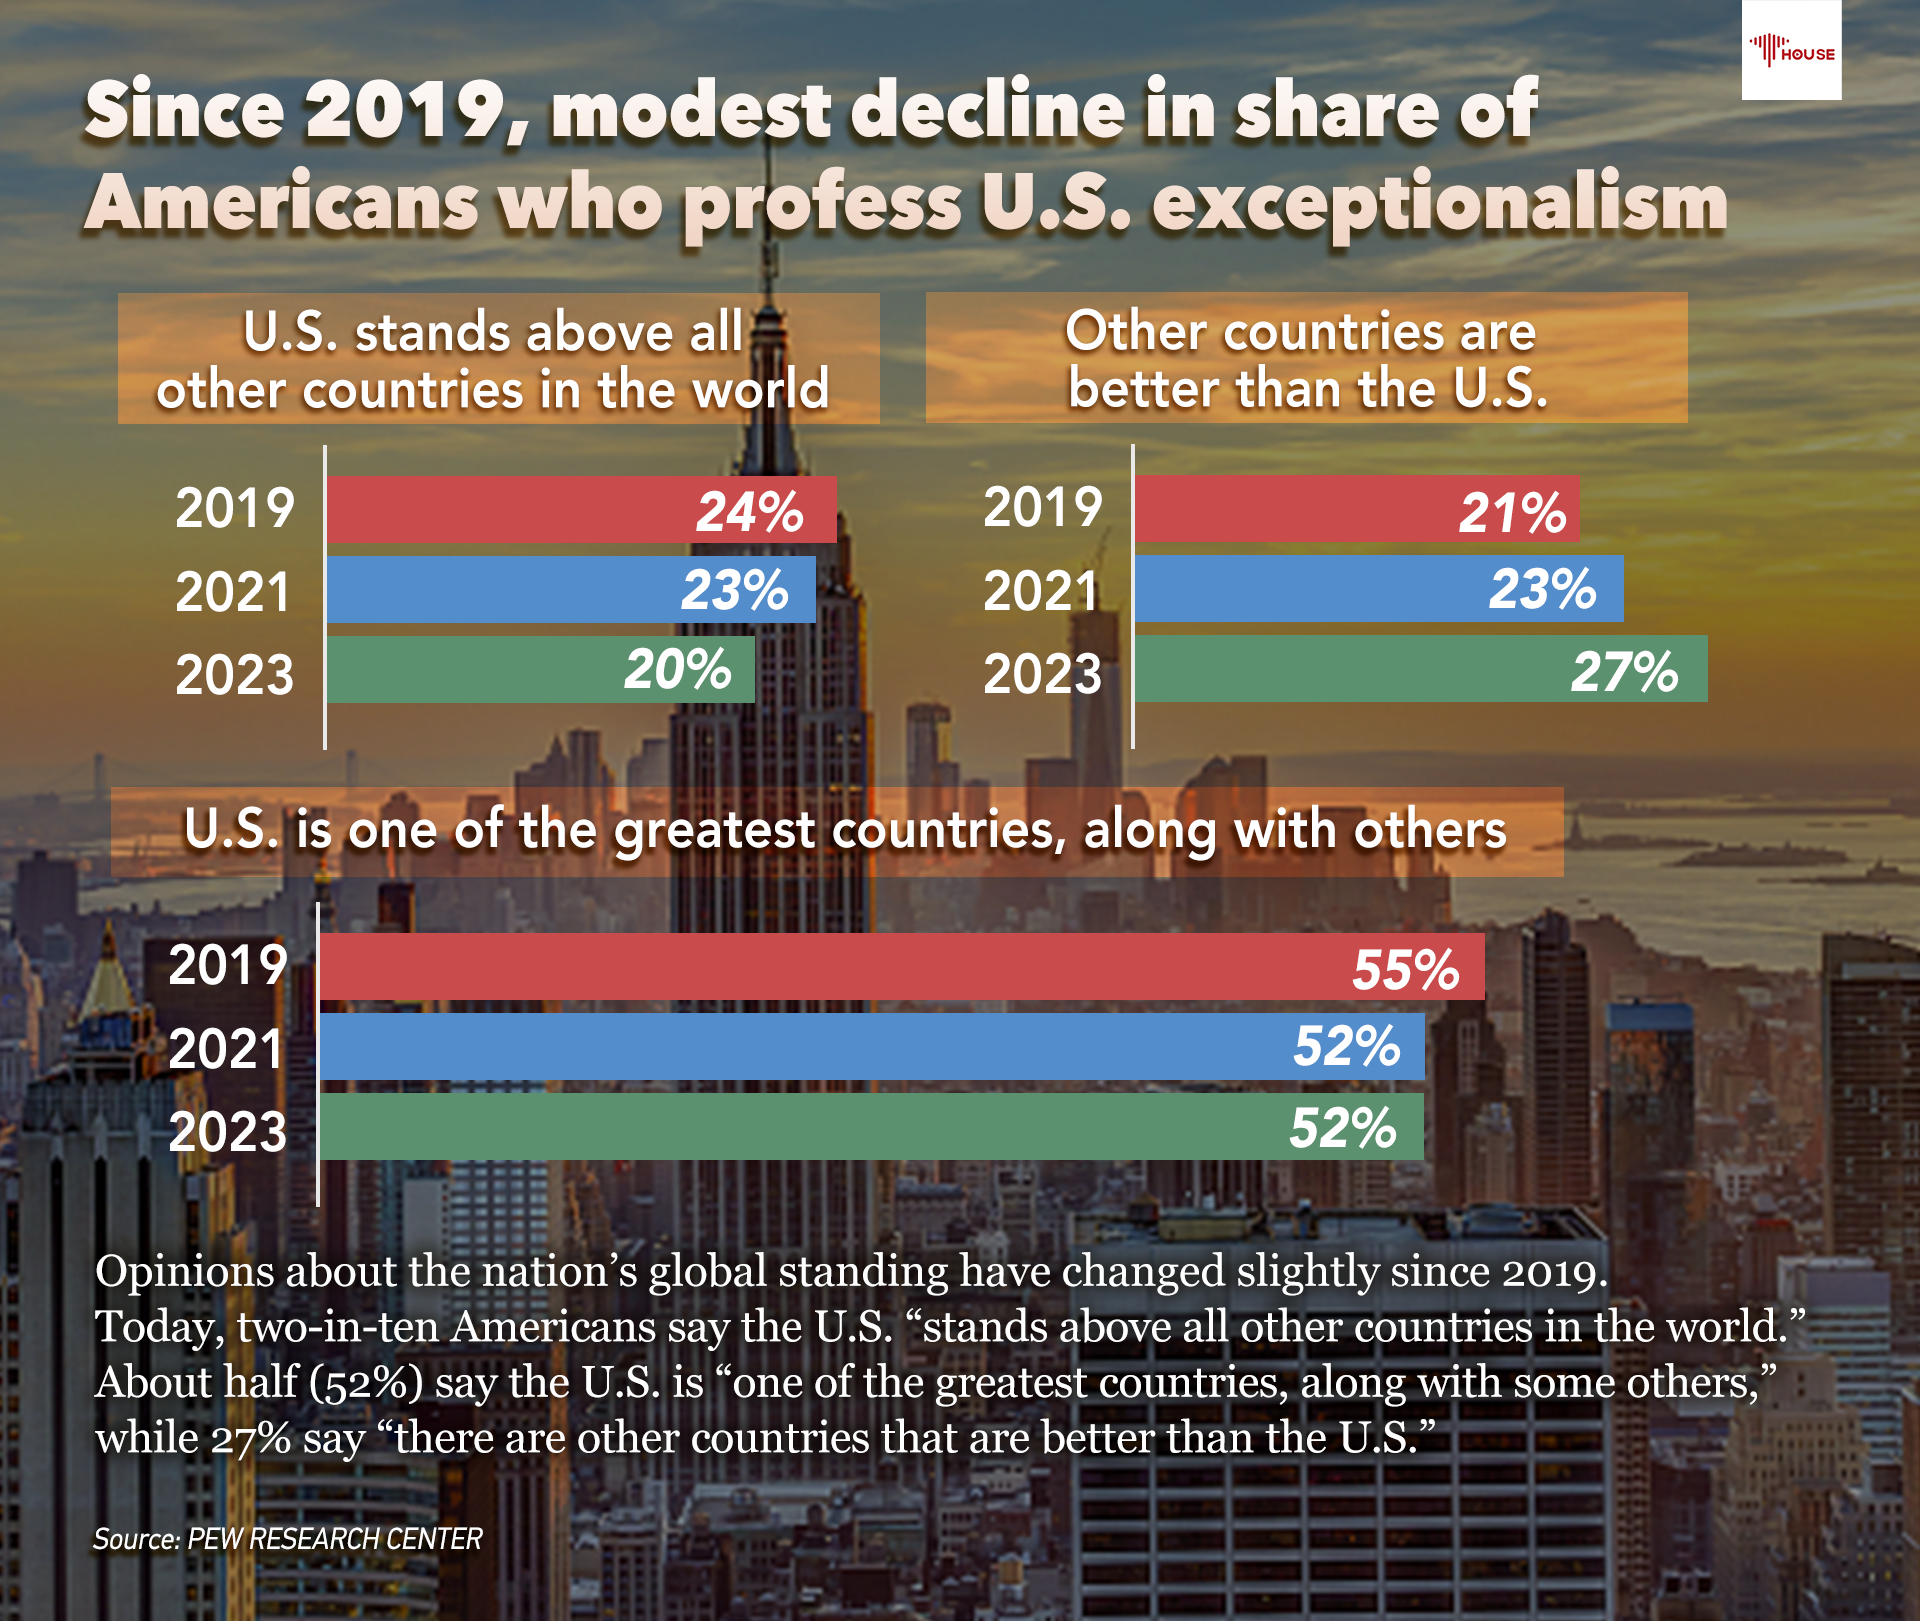 Modest decline in share of Americans who profess U.S. exceptionalism